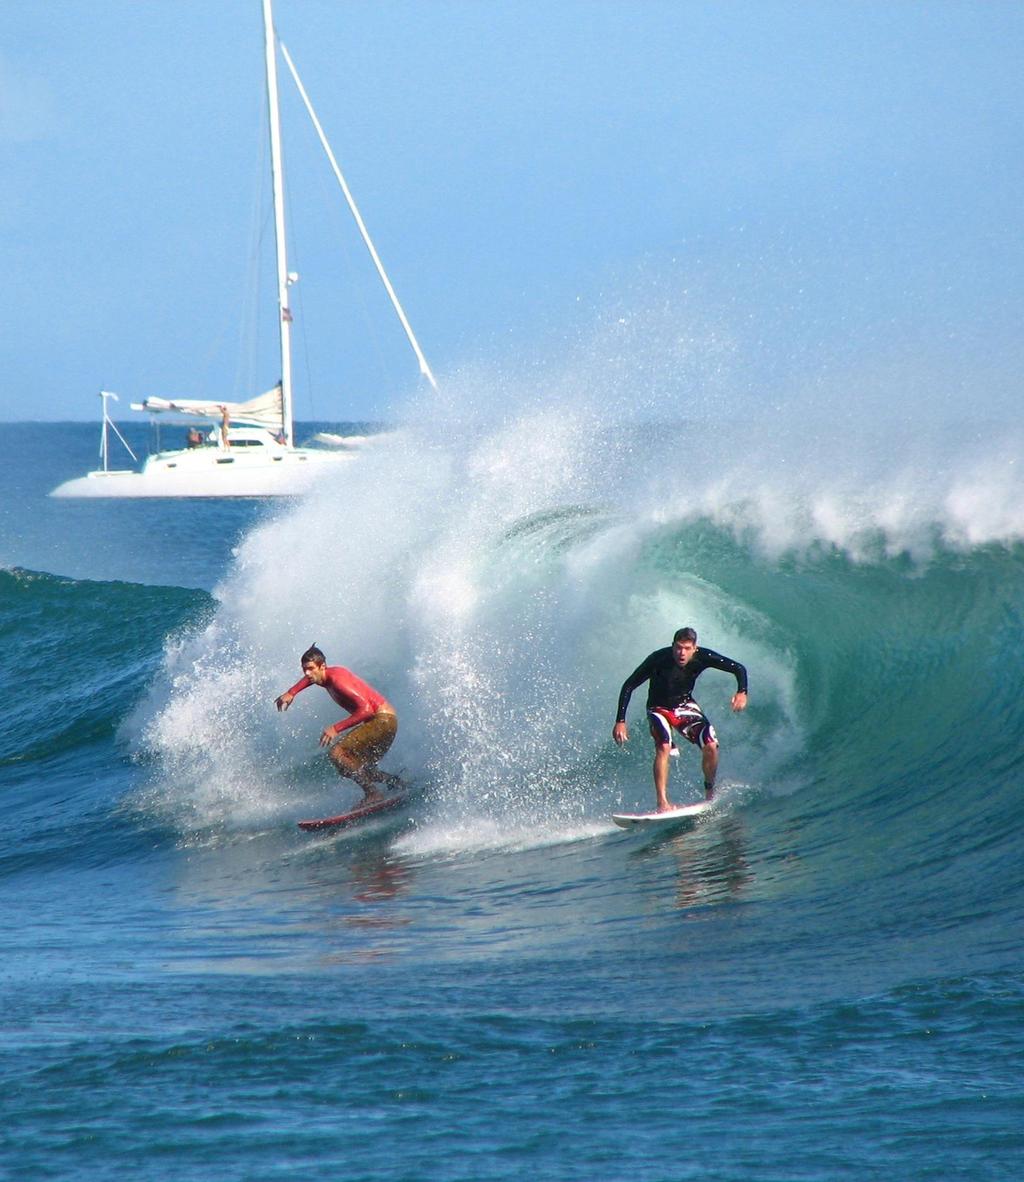 Tow-in surfing